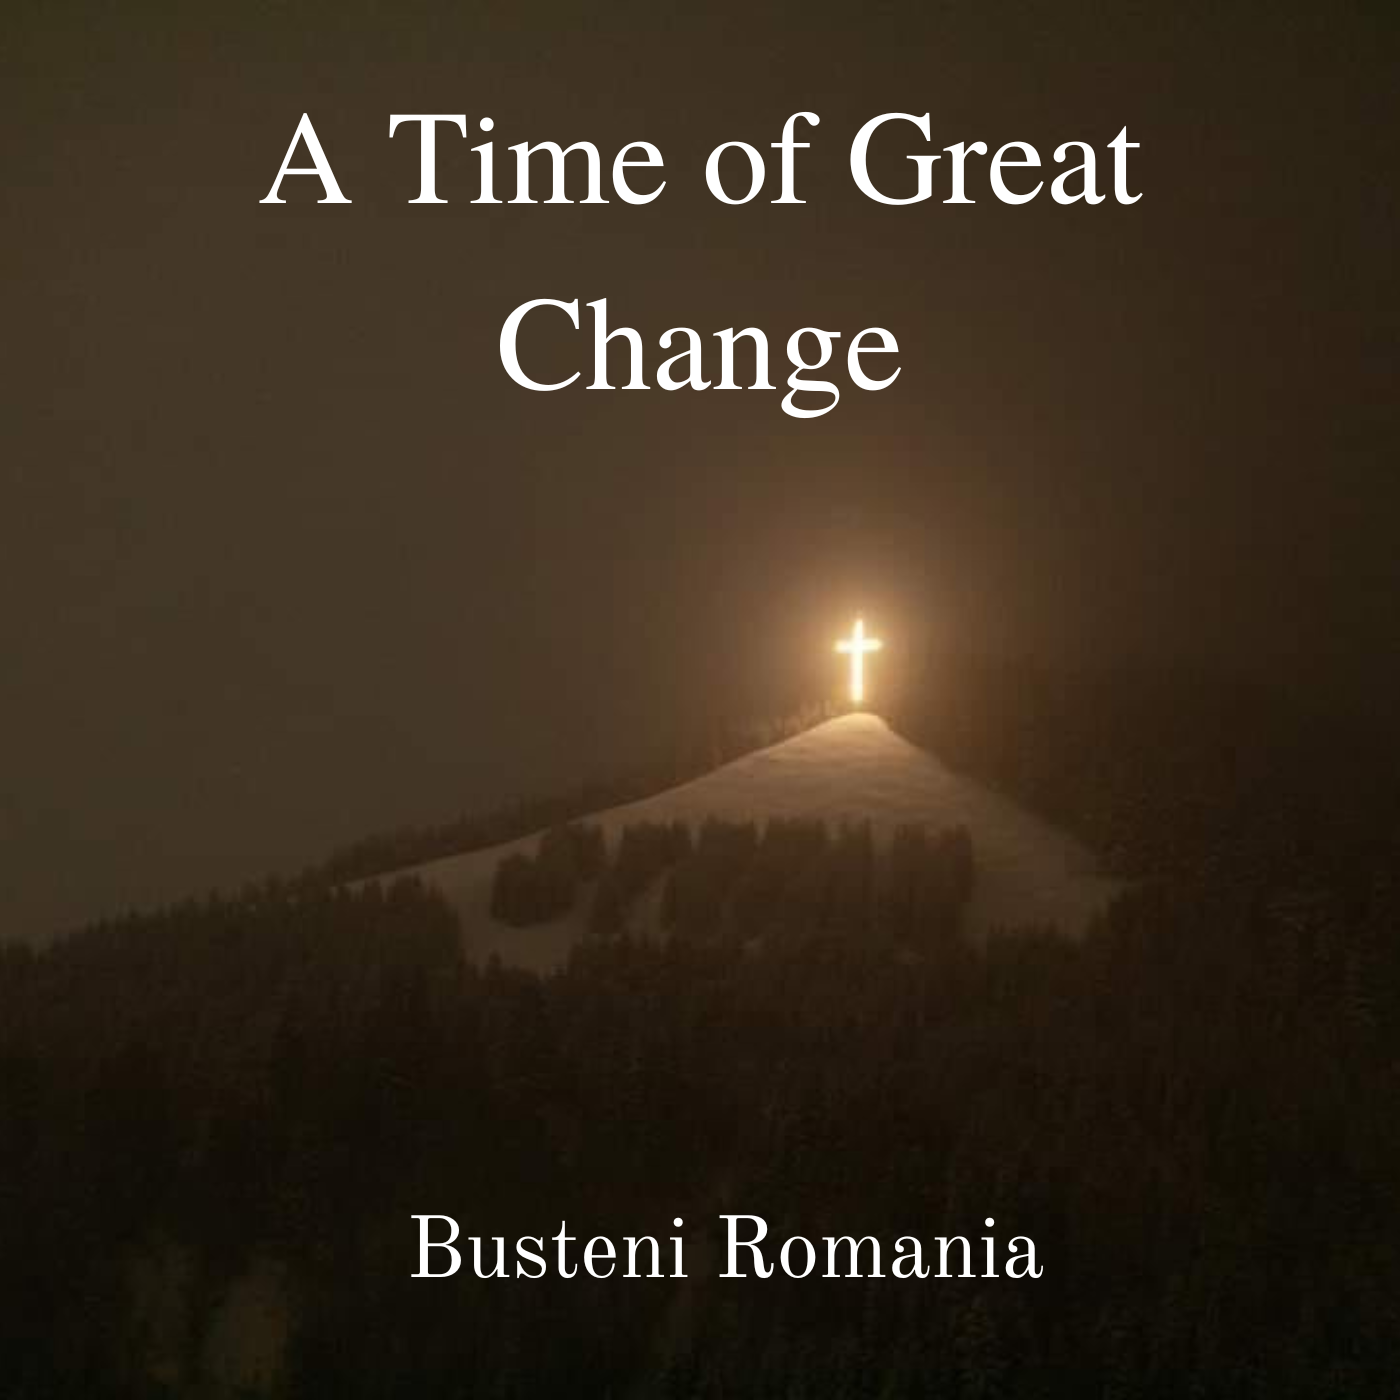 * A Time of Great Change